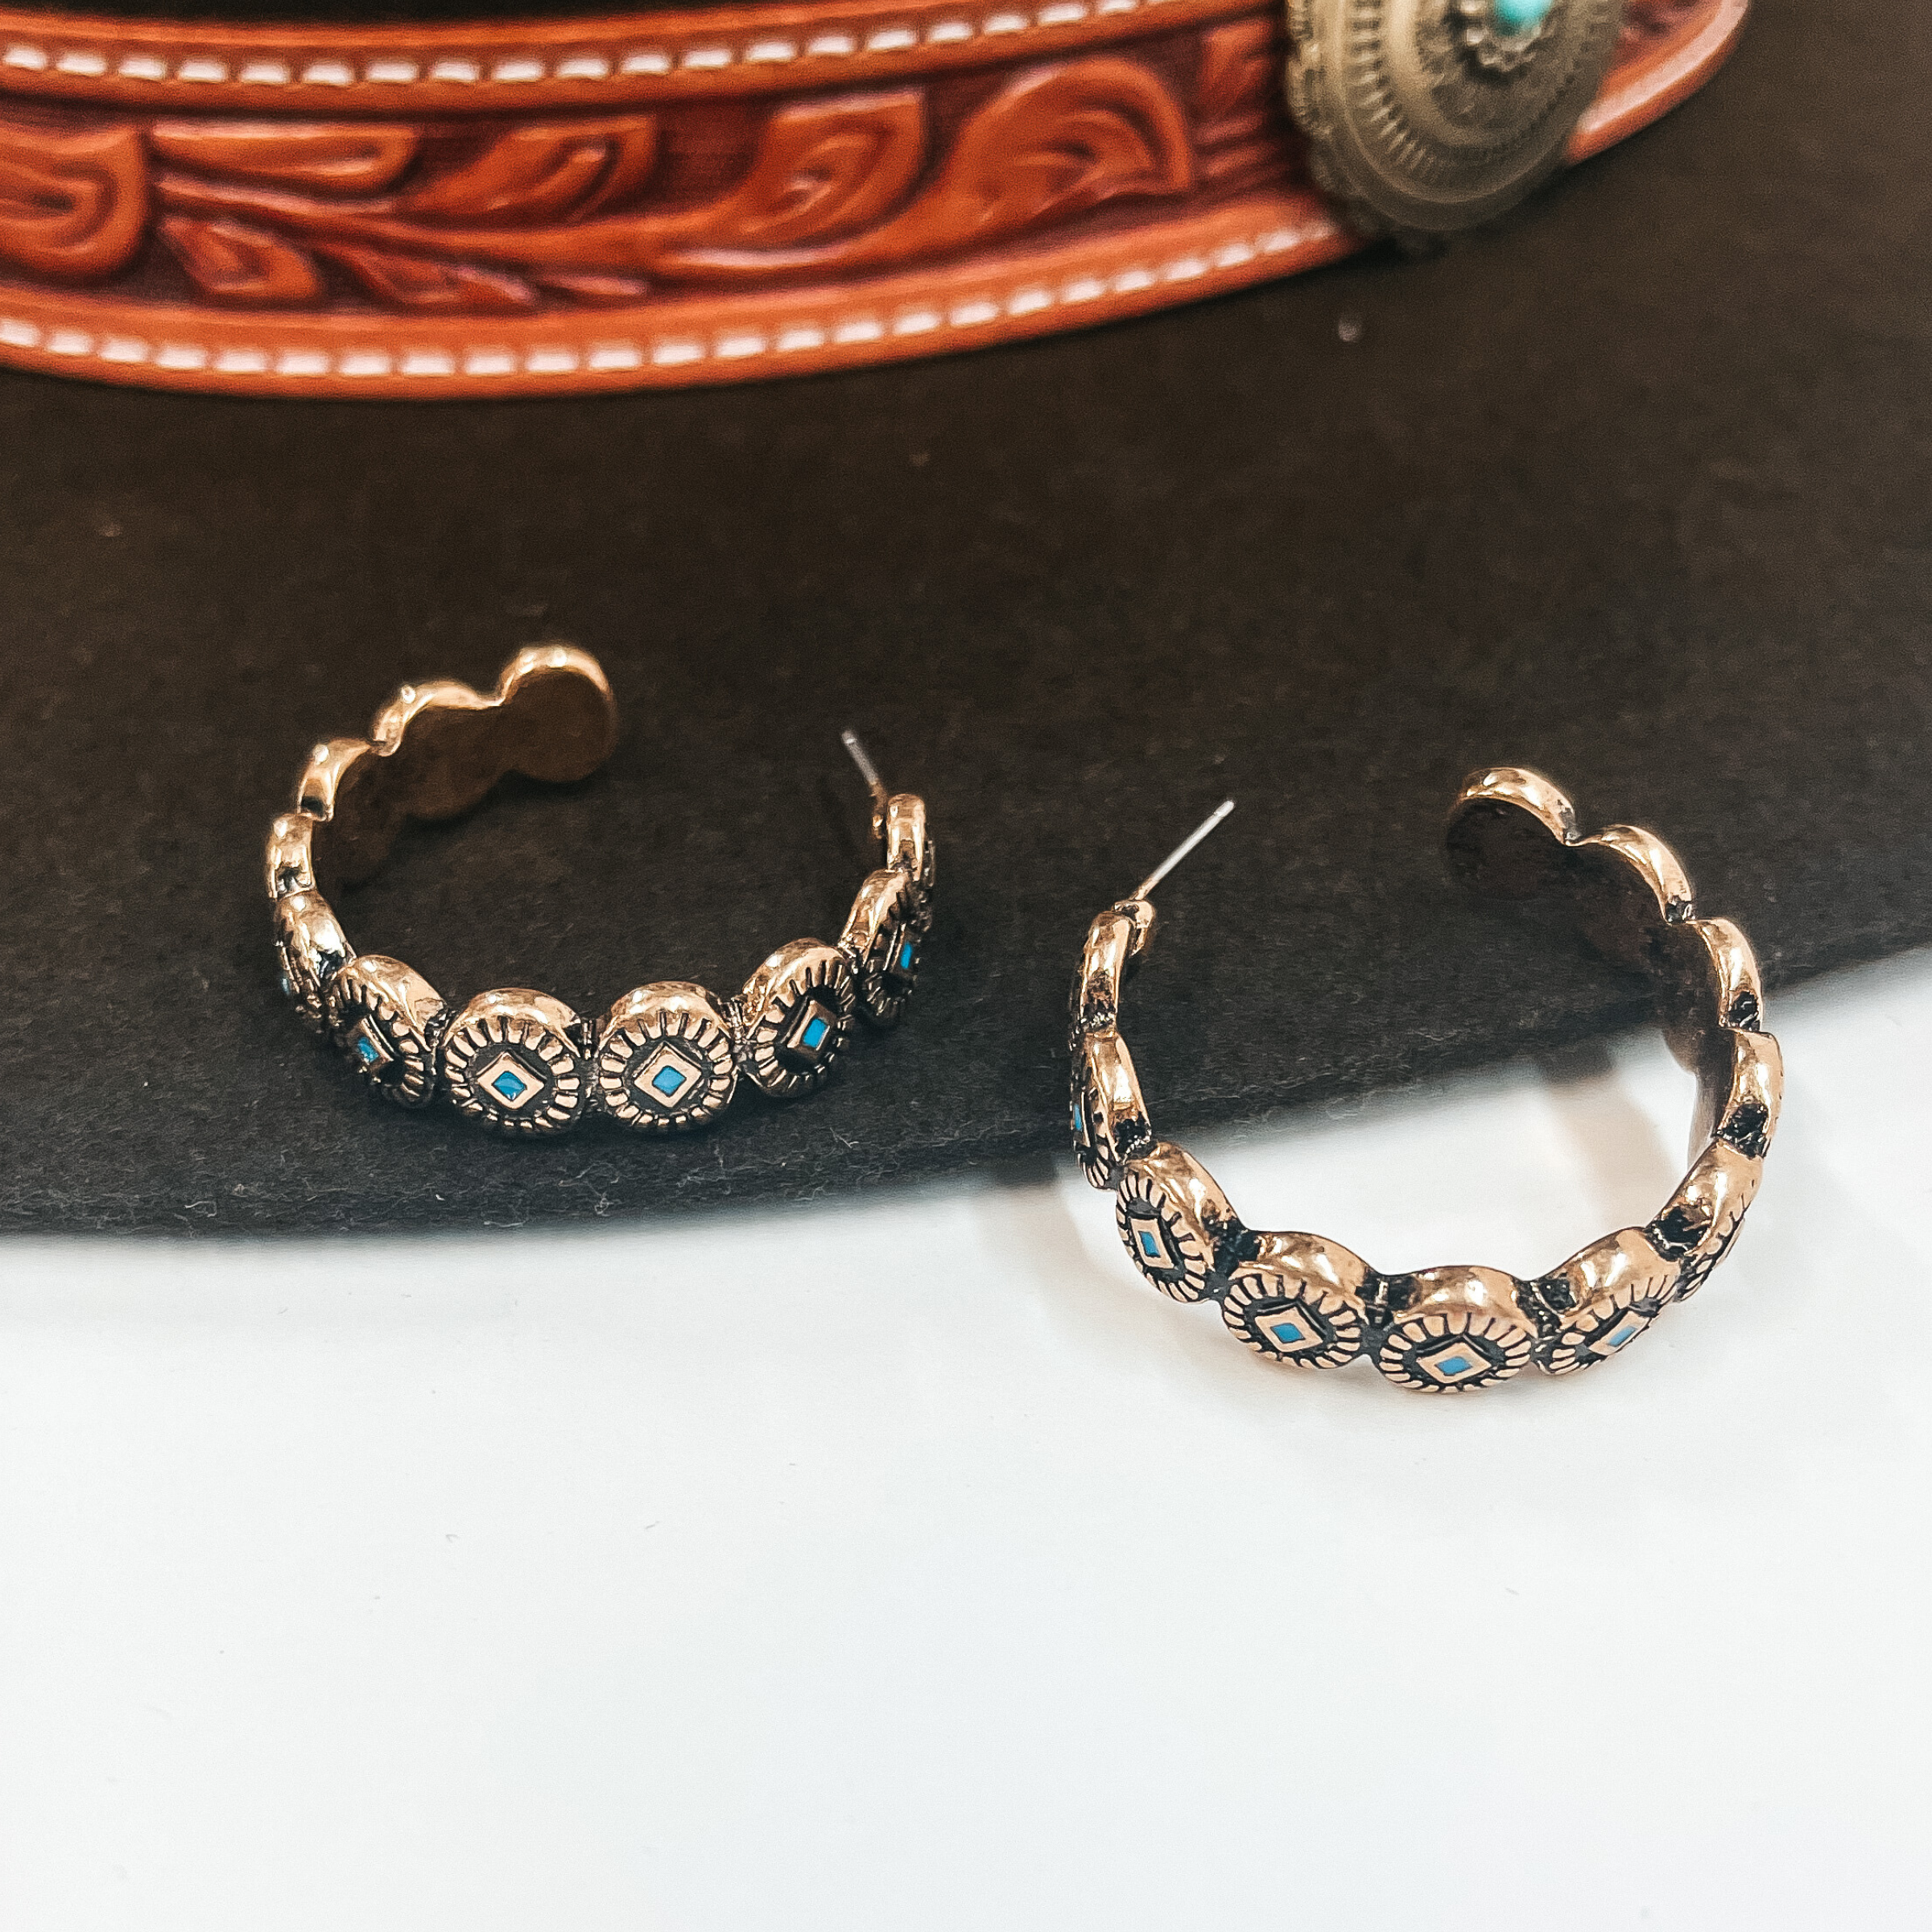 Gold semi hoop with post back backing, hoops are  engraved with western design and has a bit of  turquoise detailing as well. These earrings are taken  on a dark brown hat and white background. 